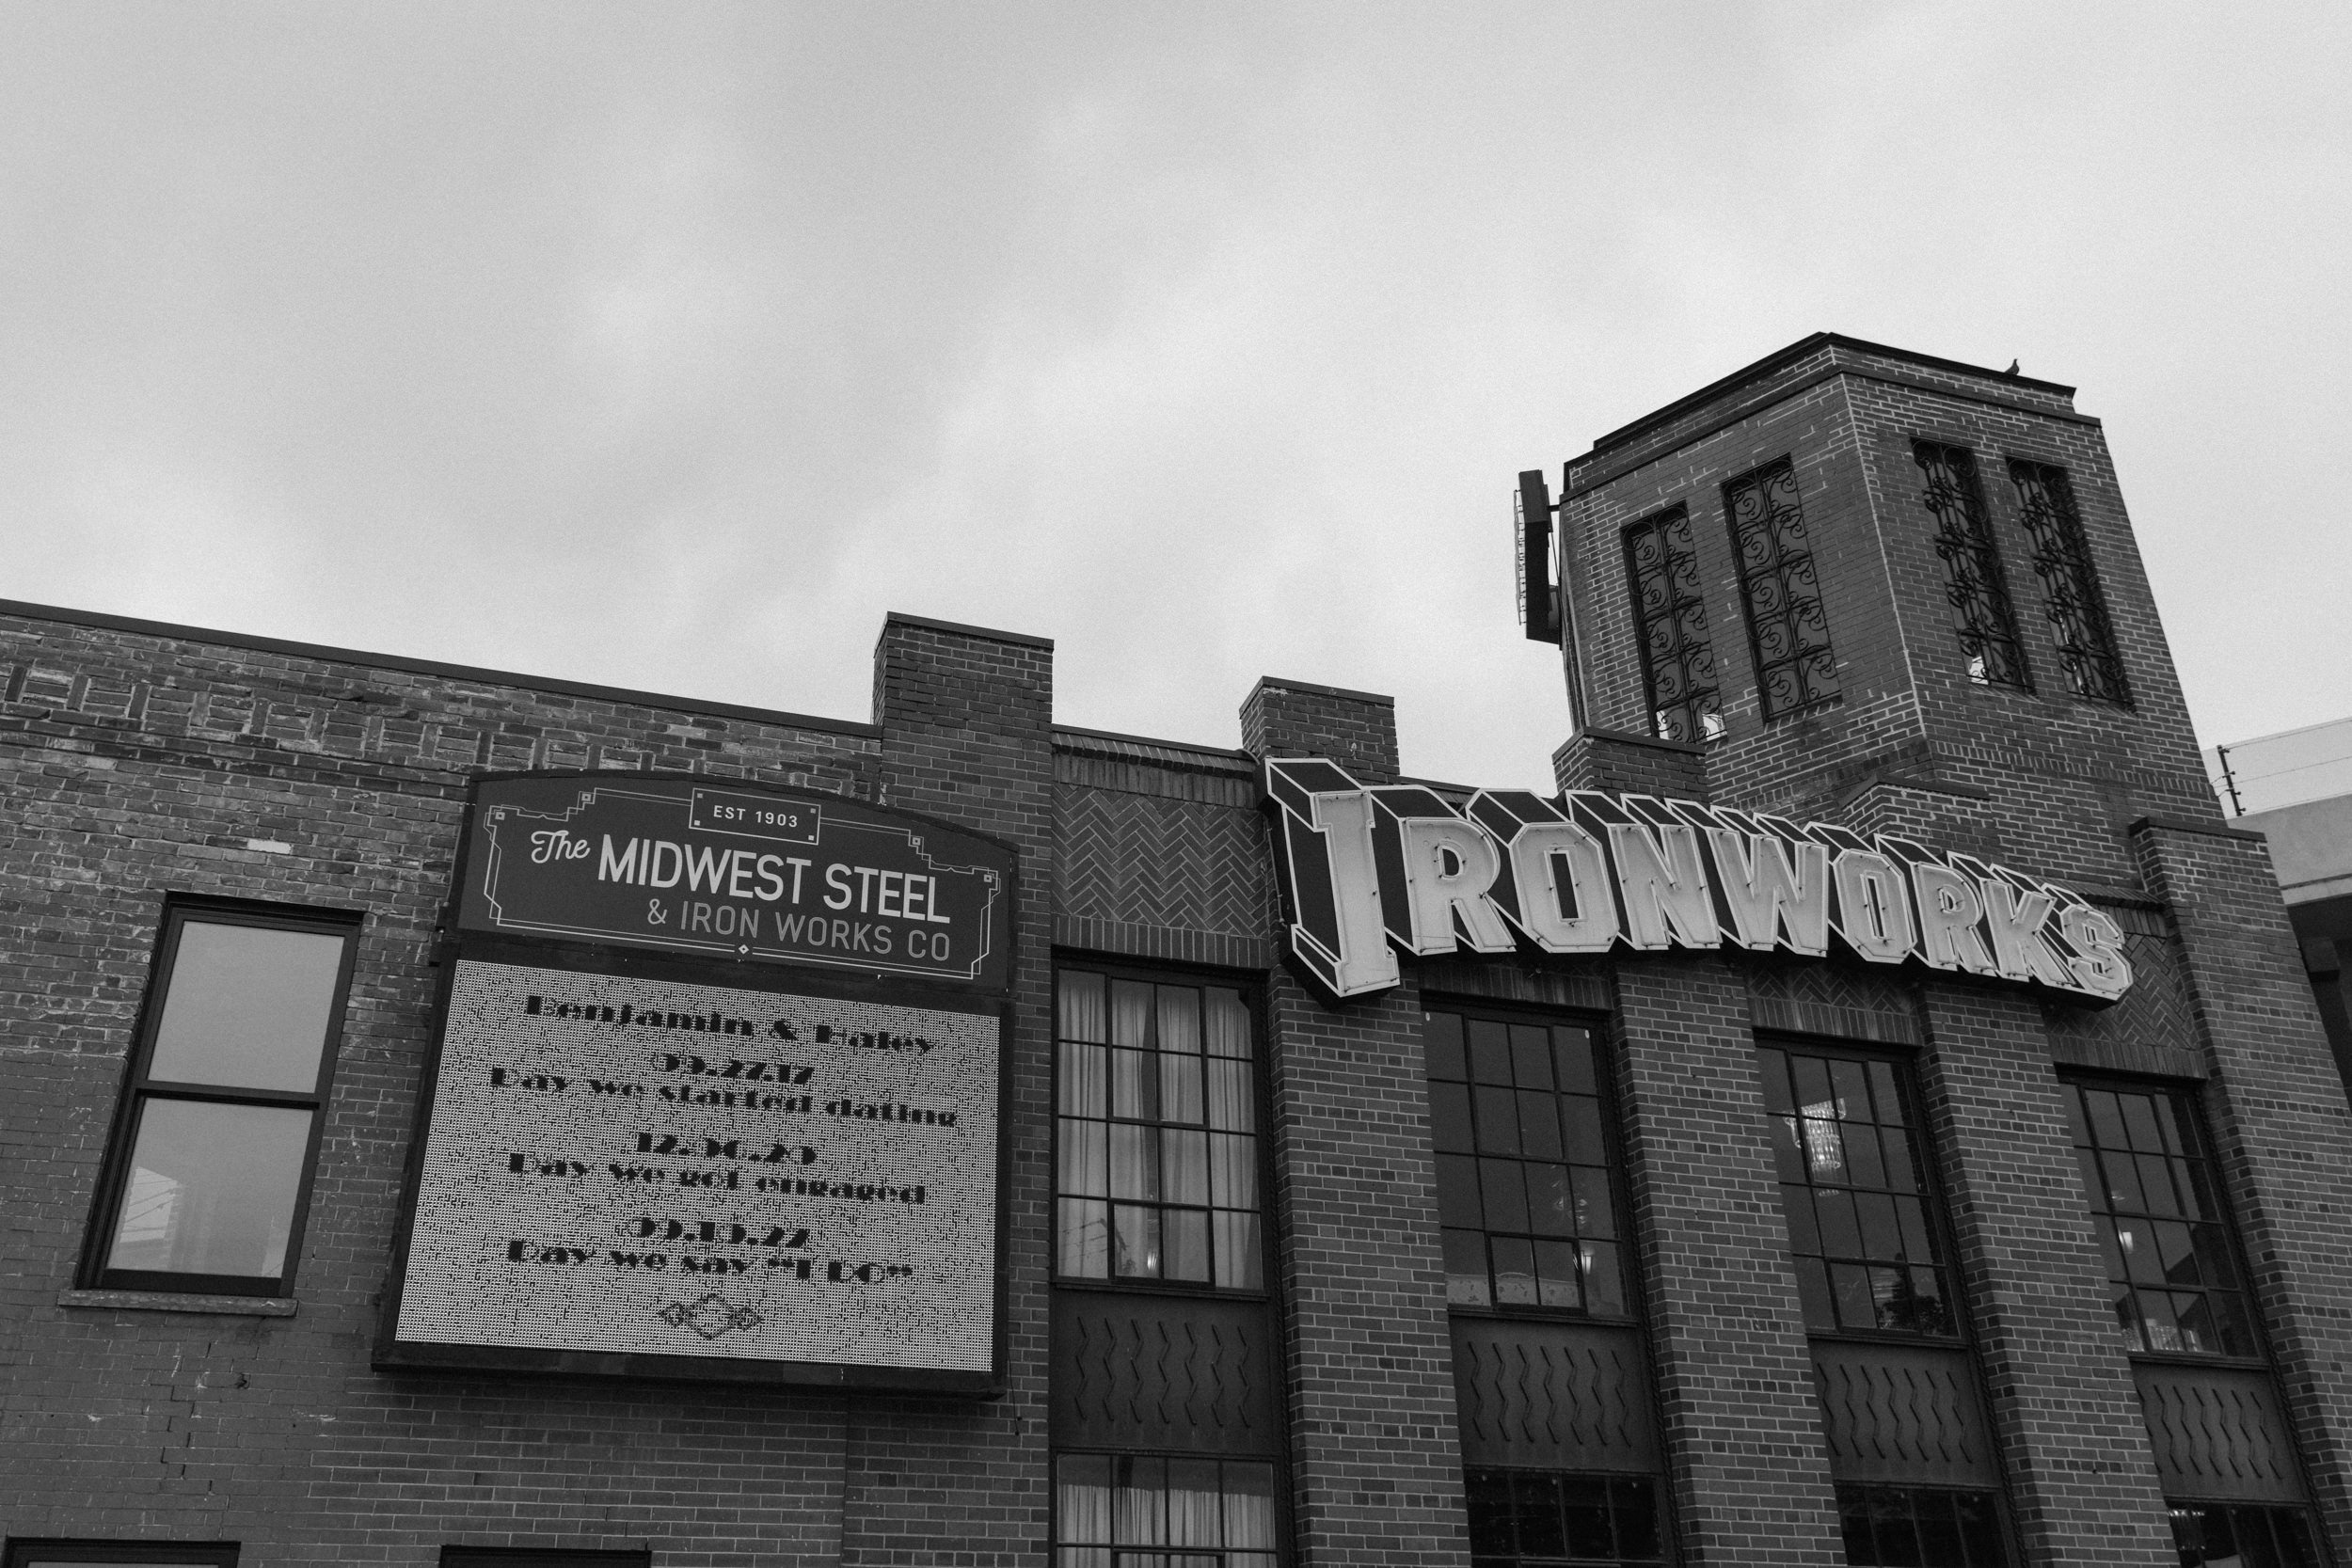 View of the front of Ironworks in Denver, CO